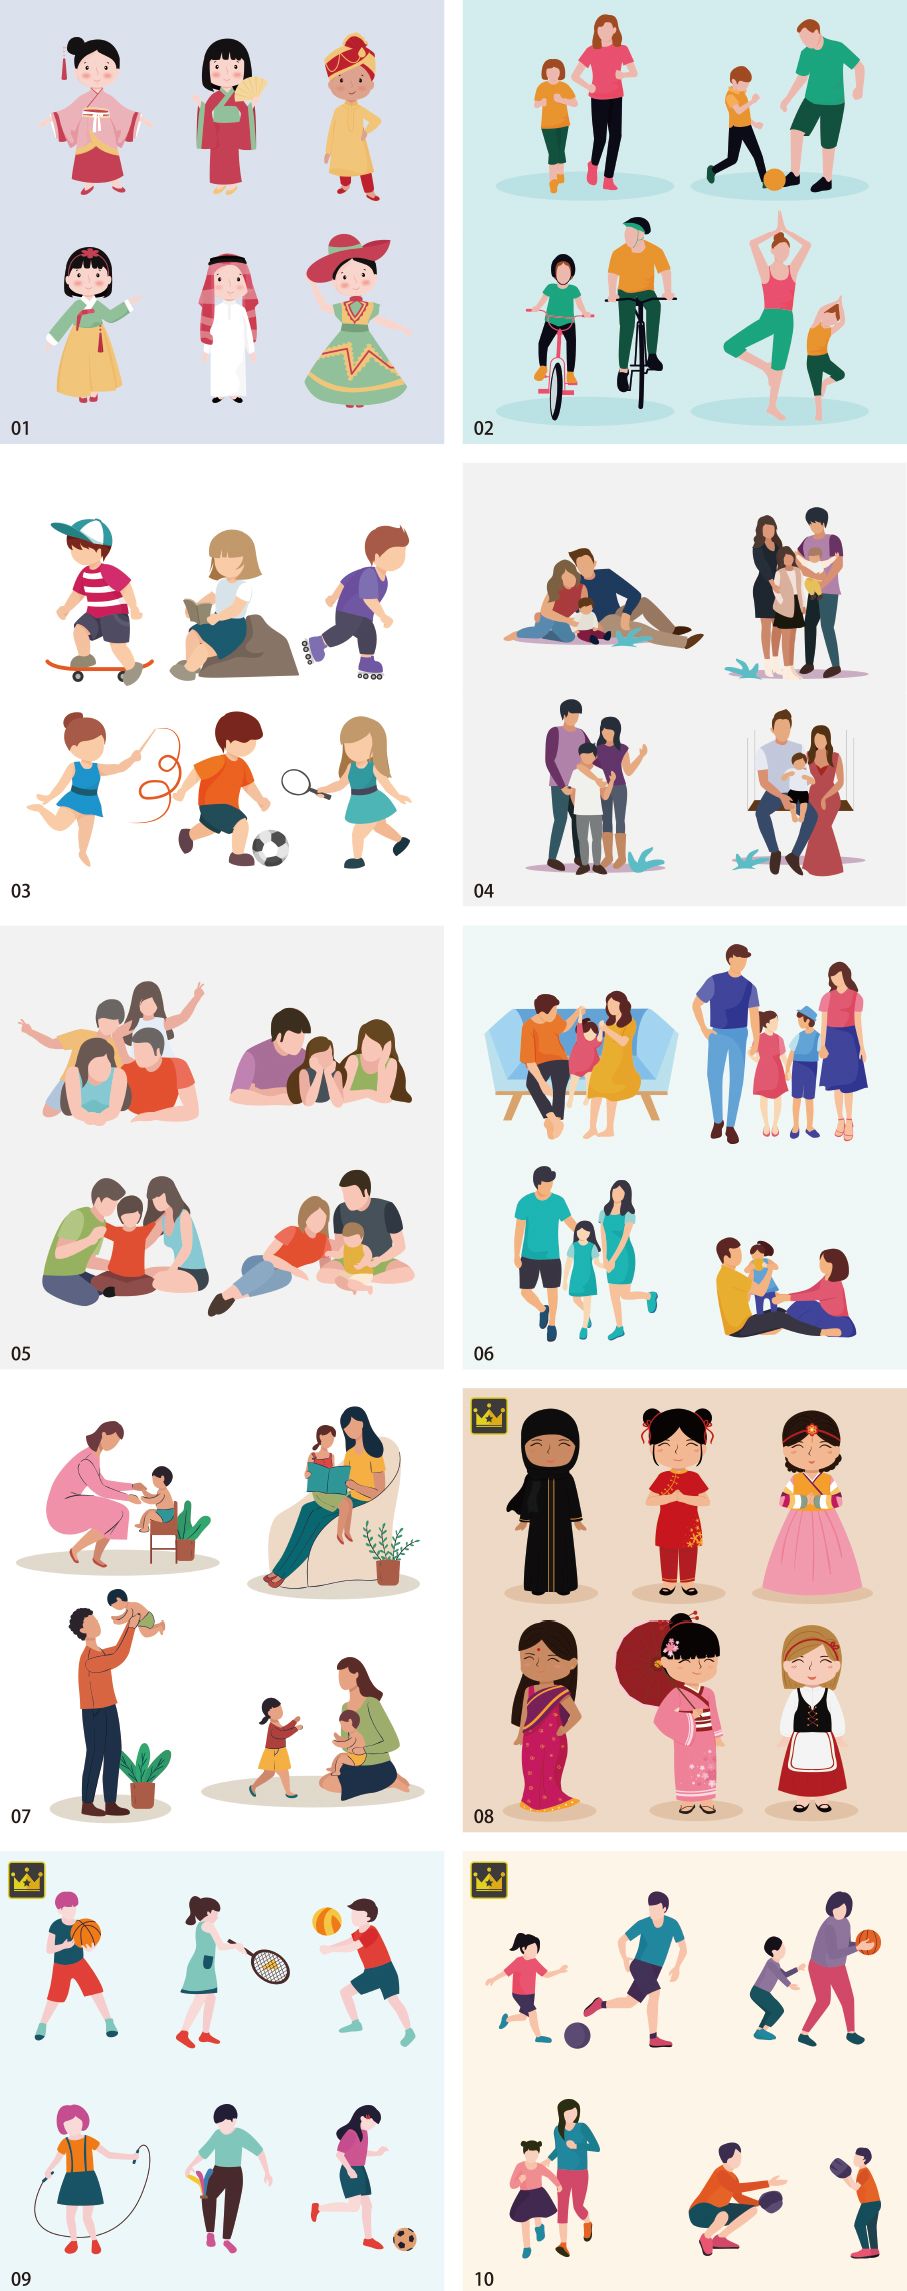 Childrens day illustration collection